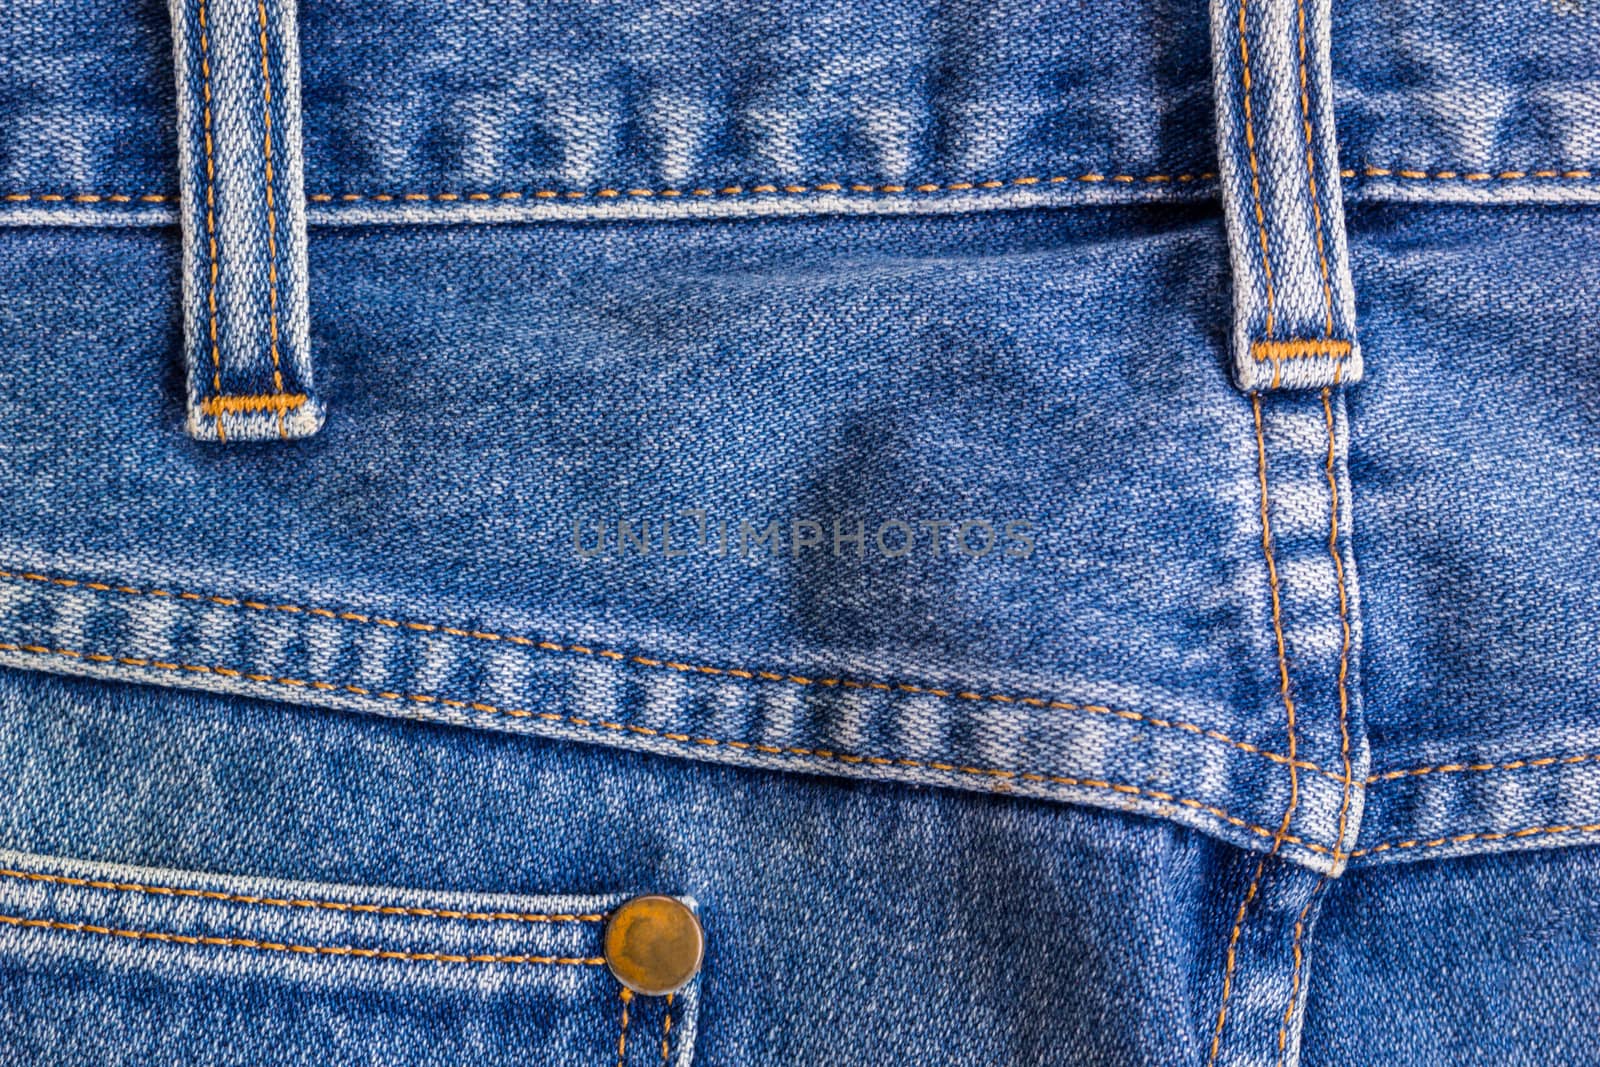 blue jeans texture and background, close-up denim jeans by rakoptonLPN